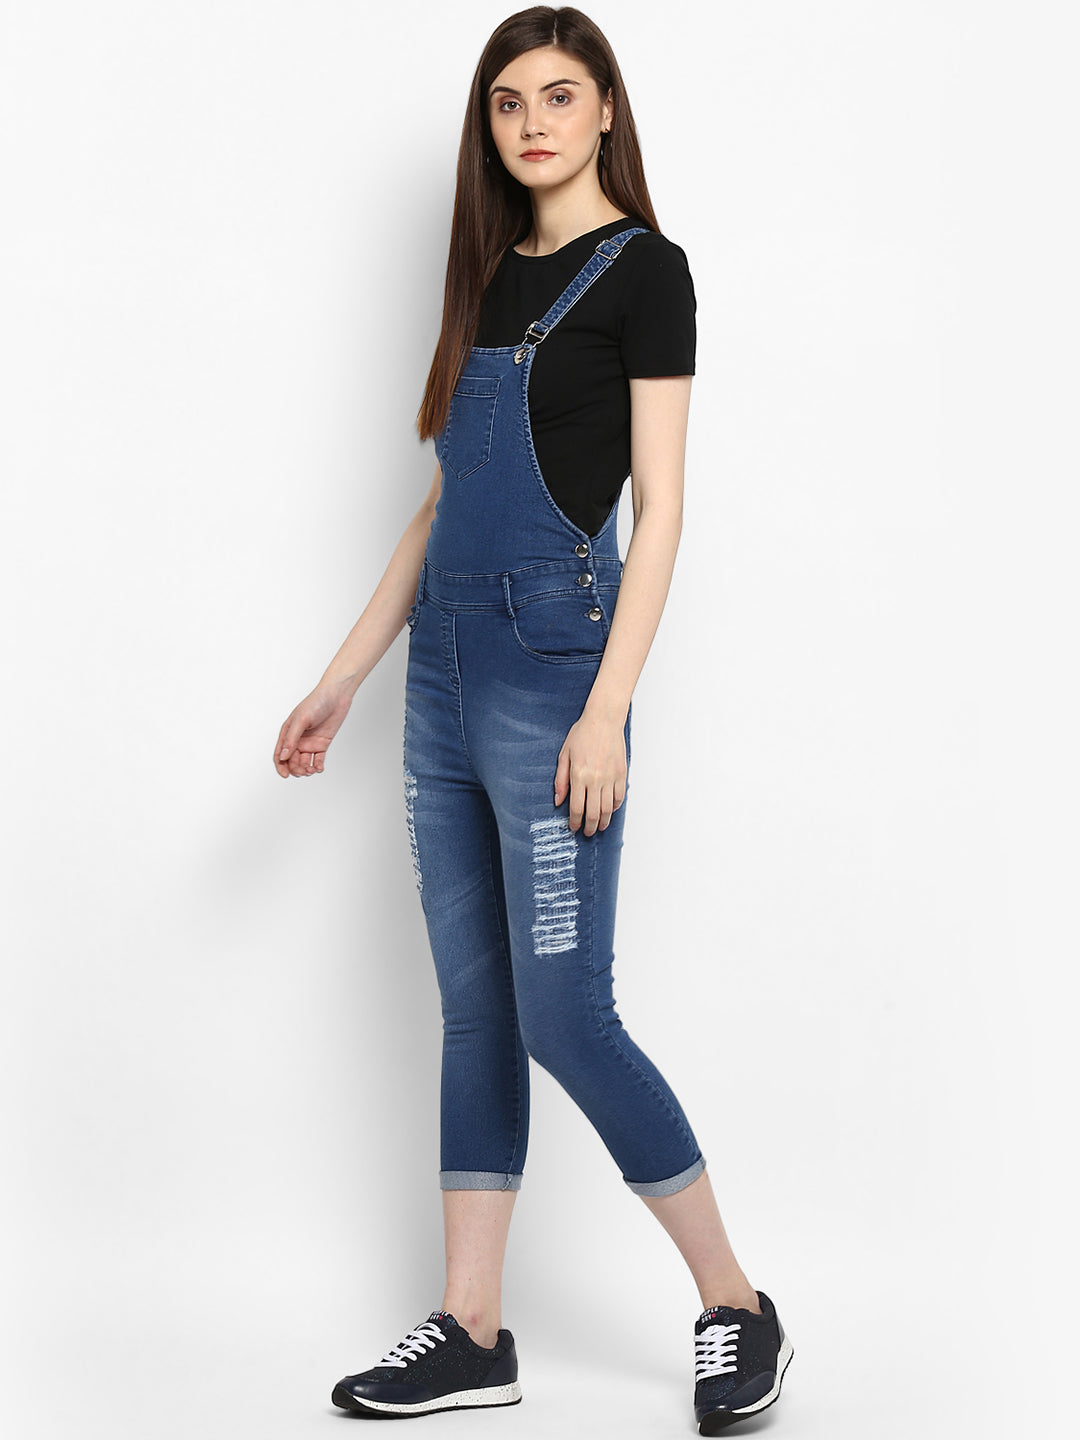 Women's Distressed Stretchable Denim Capri Style Dungarees(inner not provided)